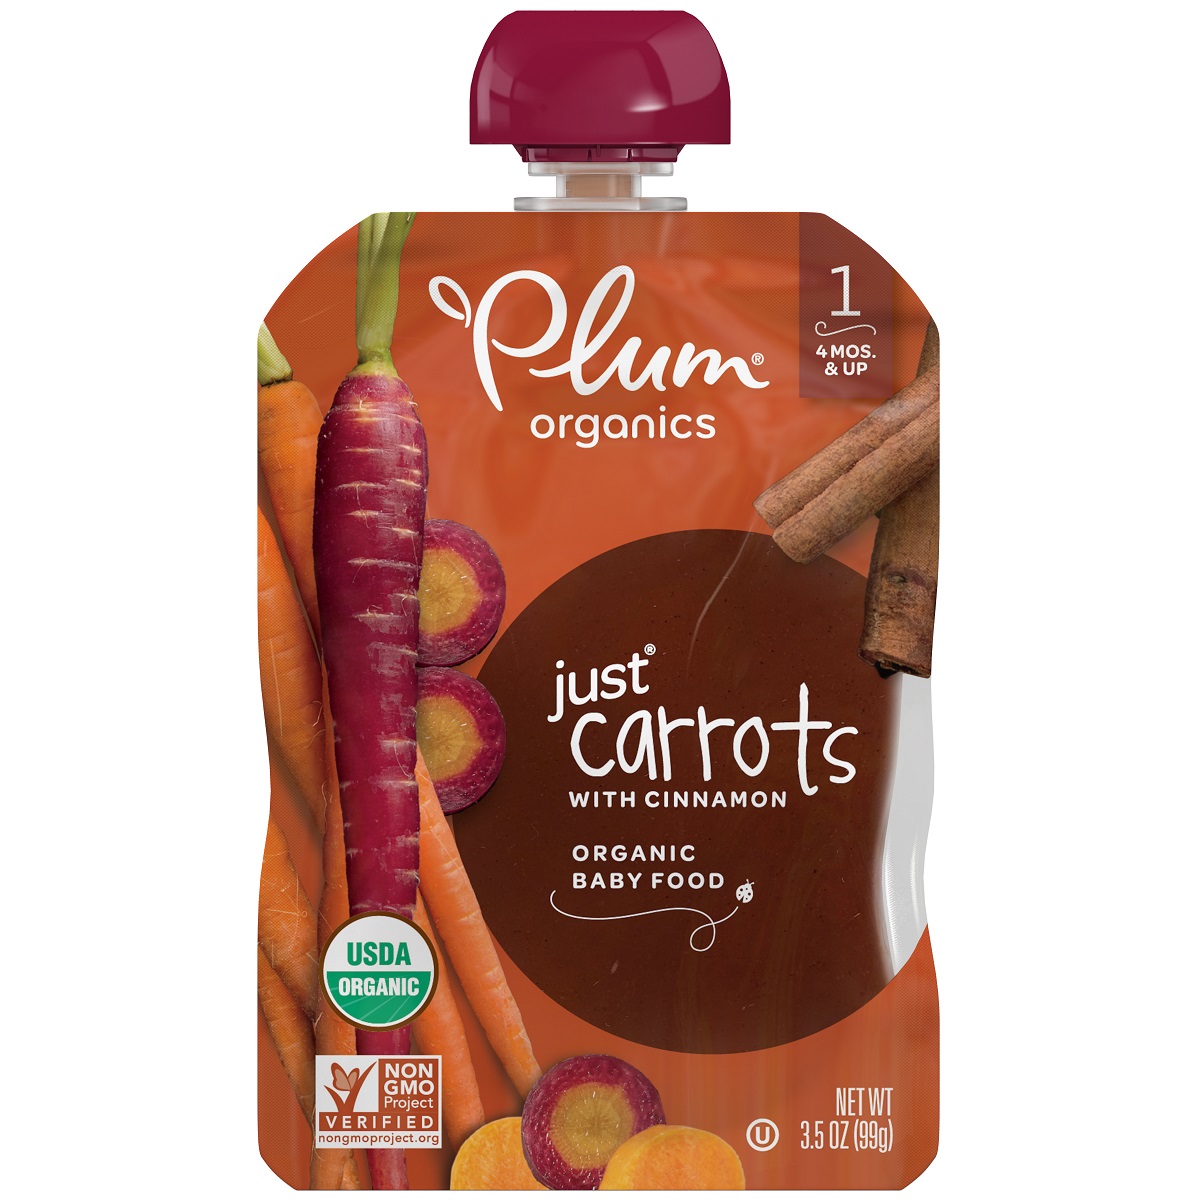 Just Carrots with Cinnamon Baby Food